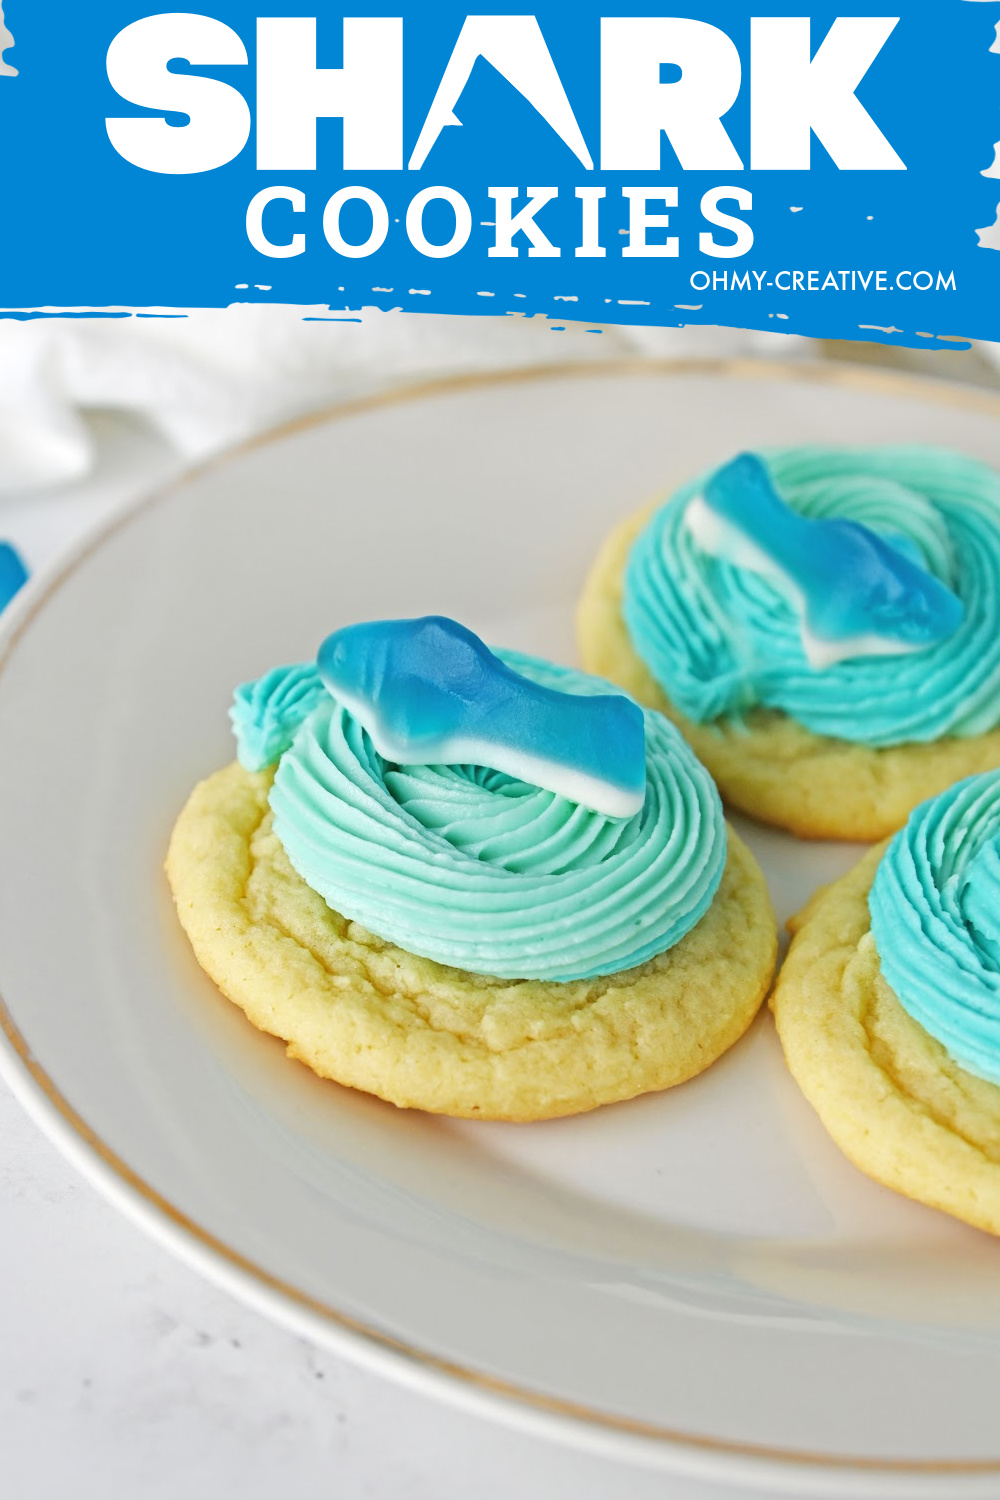 Shark cookies on a white plate with blue icing and a gummy shark.